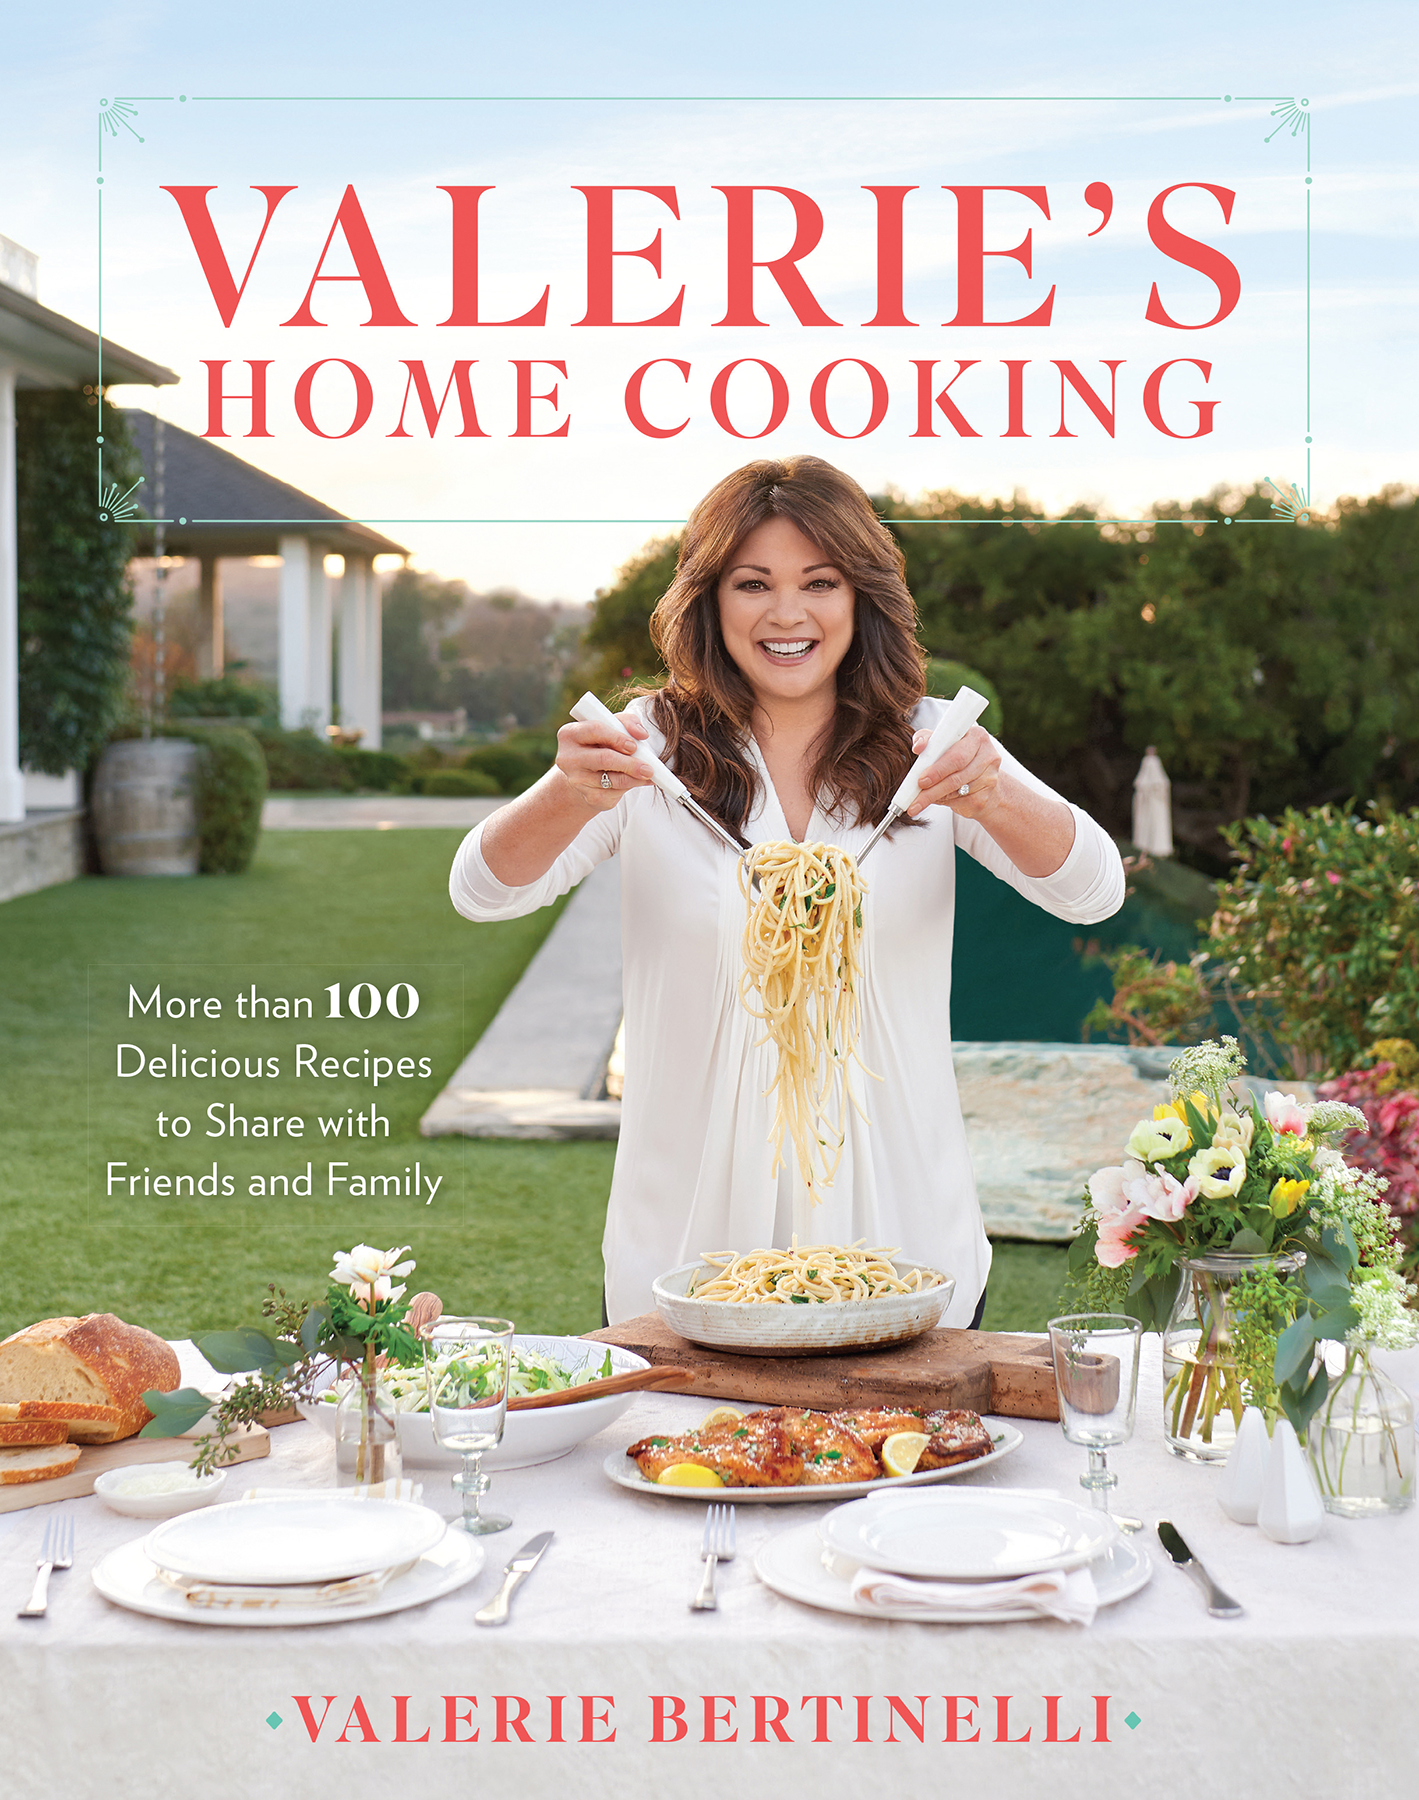 Valeries home cooking more than 100 delicious recipes to share with friends and family - image 1